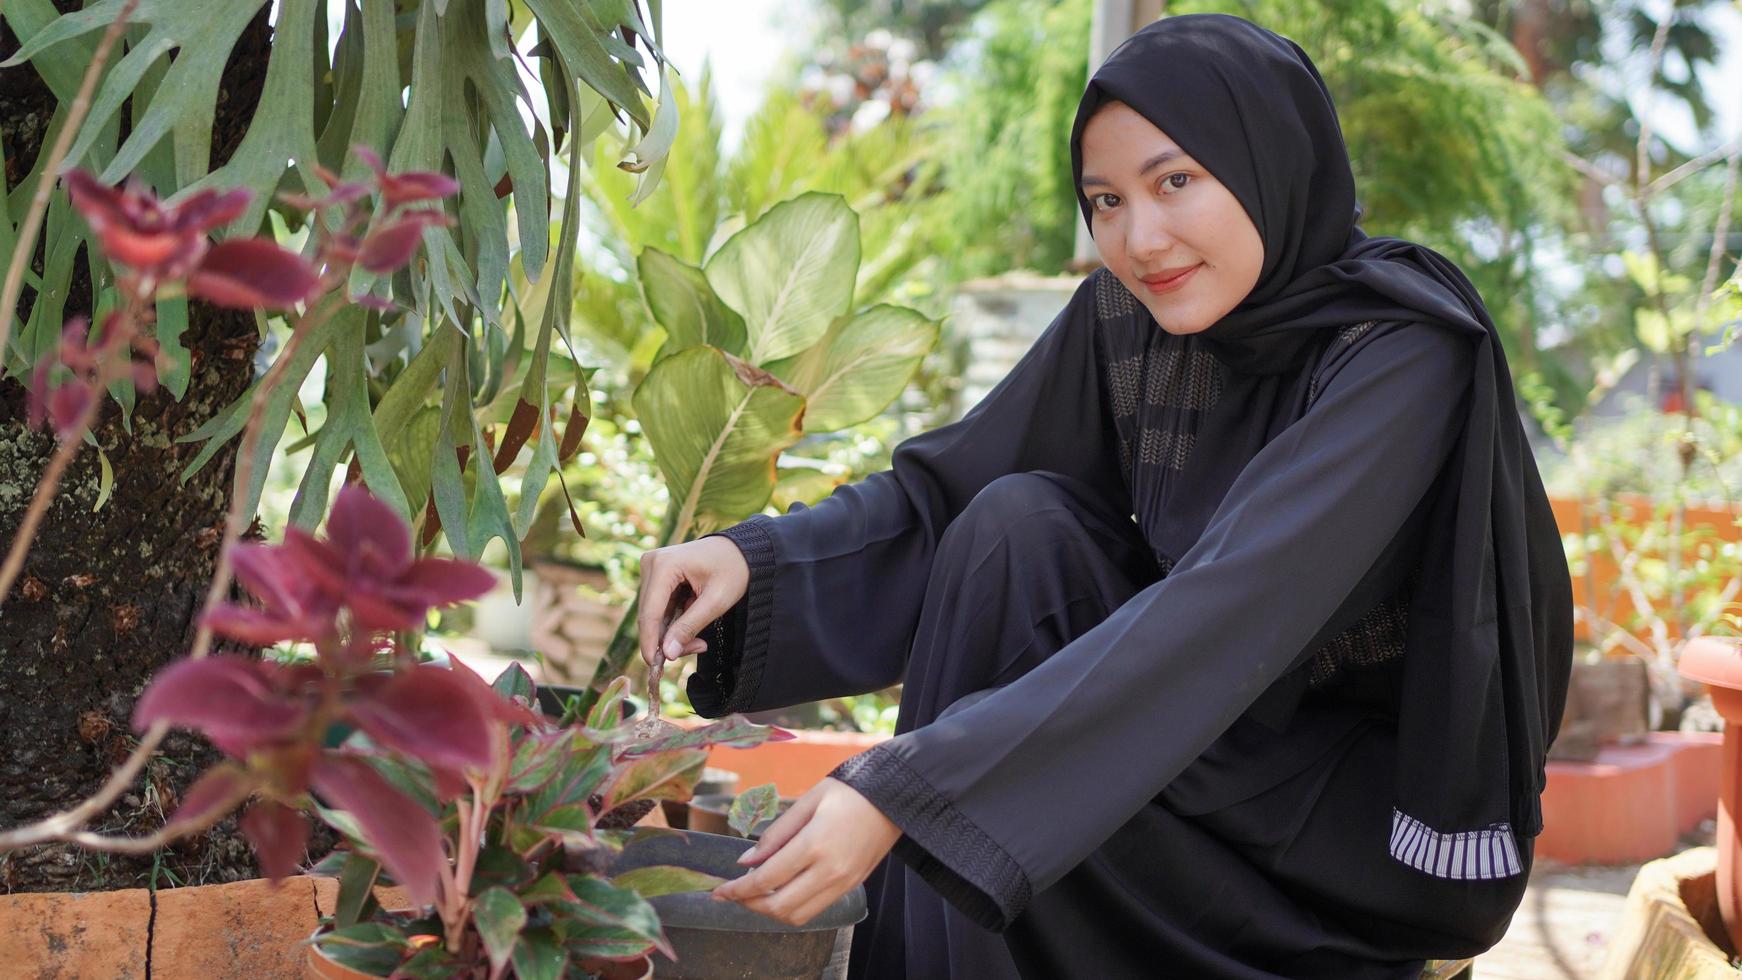 the beauty in hijab who likes to plant flowers in the garden photo